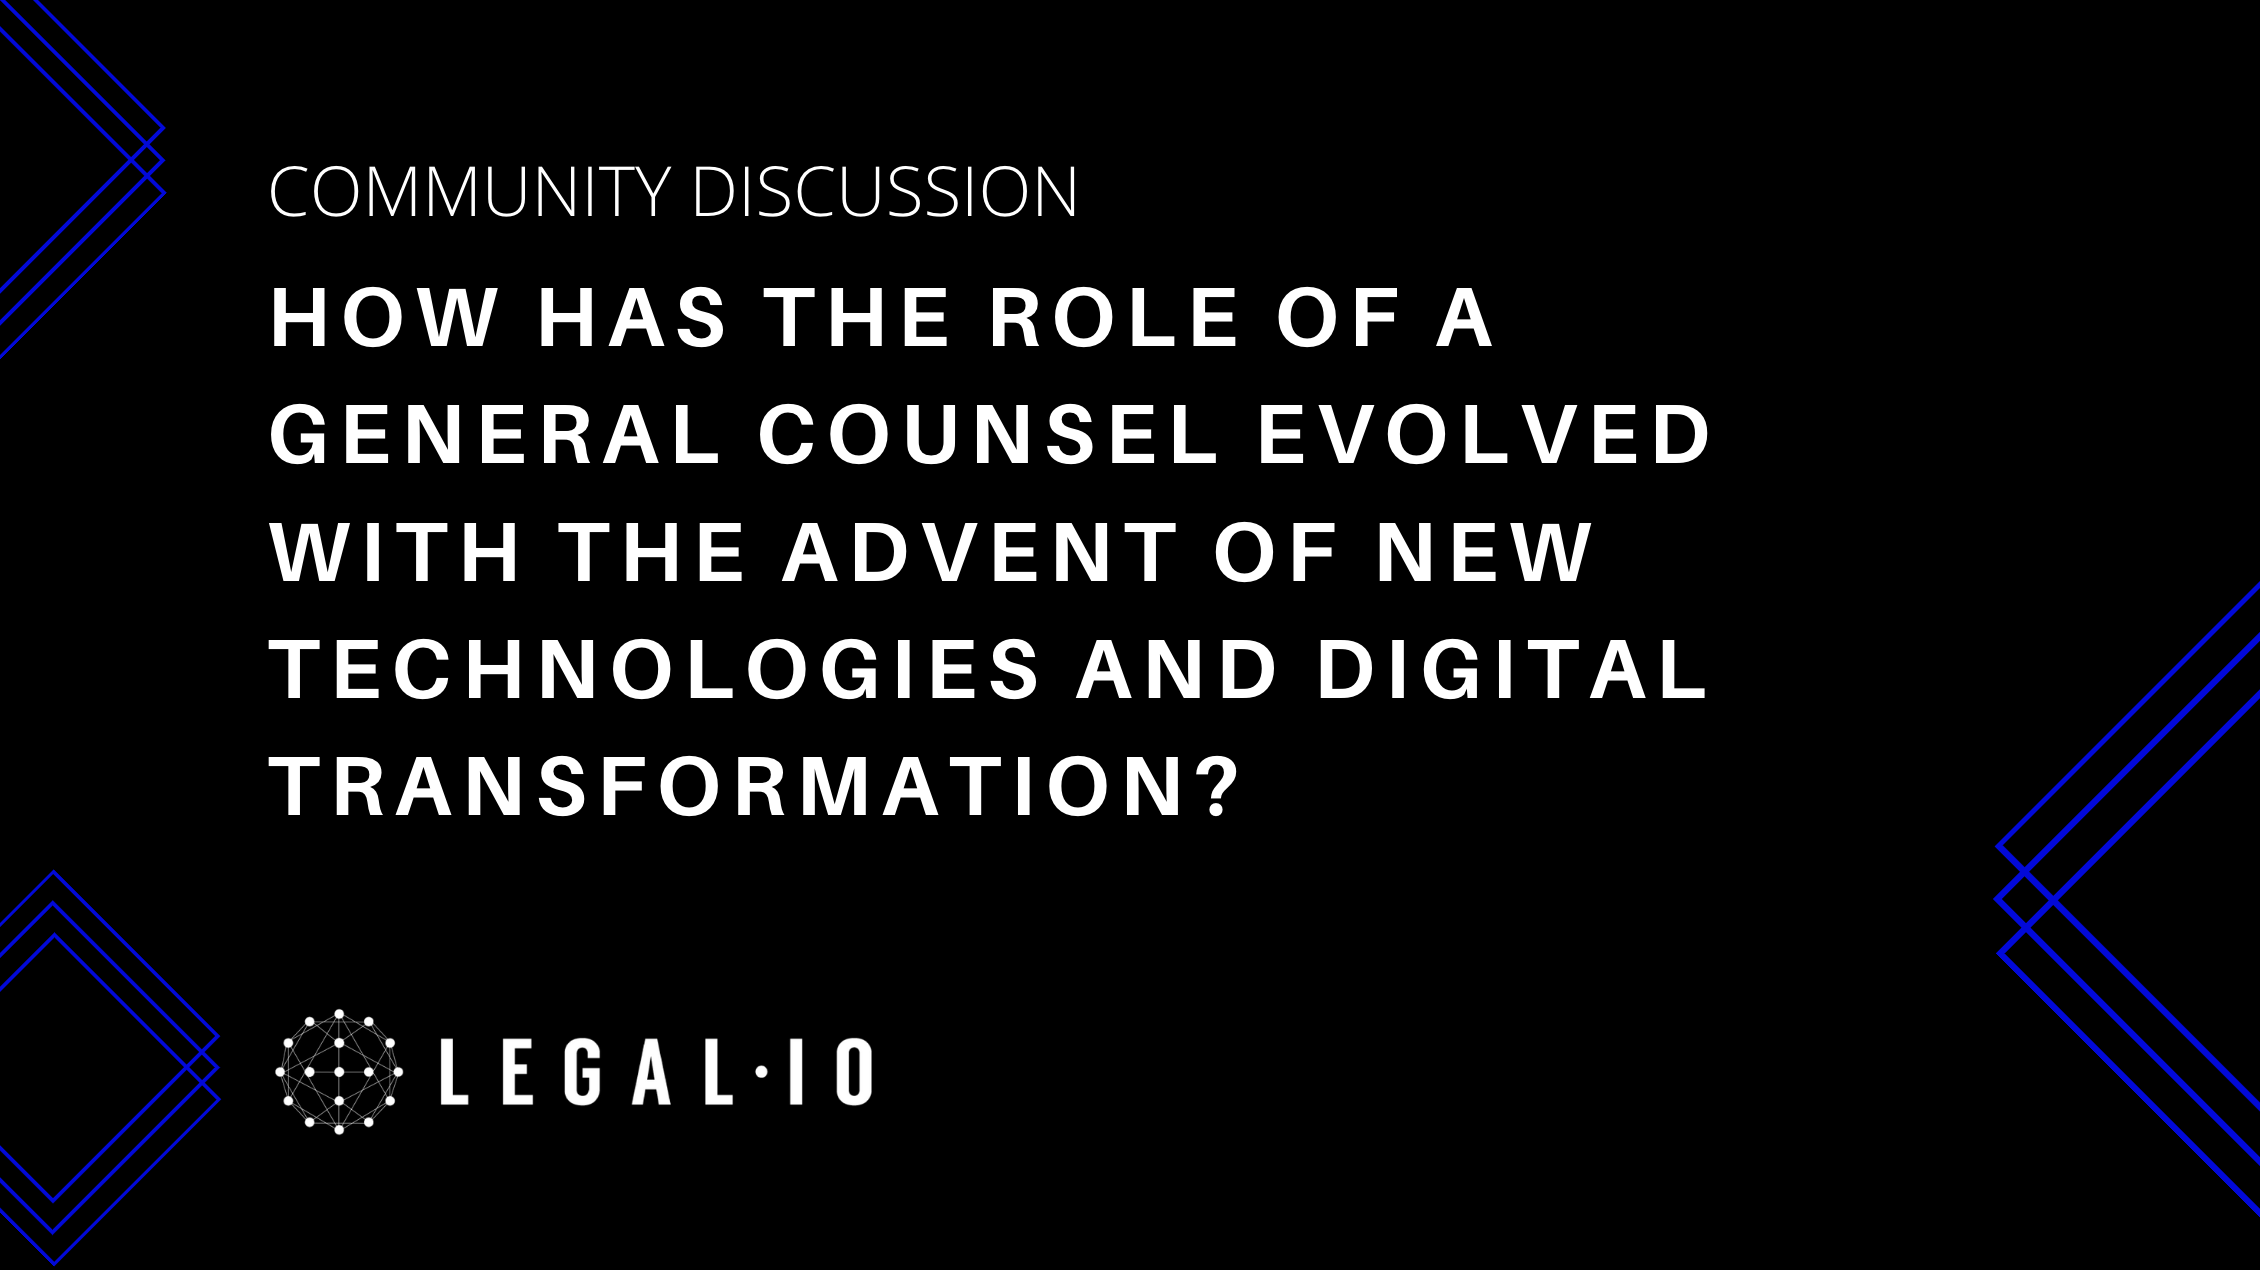 Community Discussion: How has the role of a General Counsel evolved with the advent of new technologies and digital transformation?